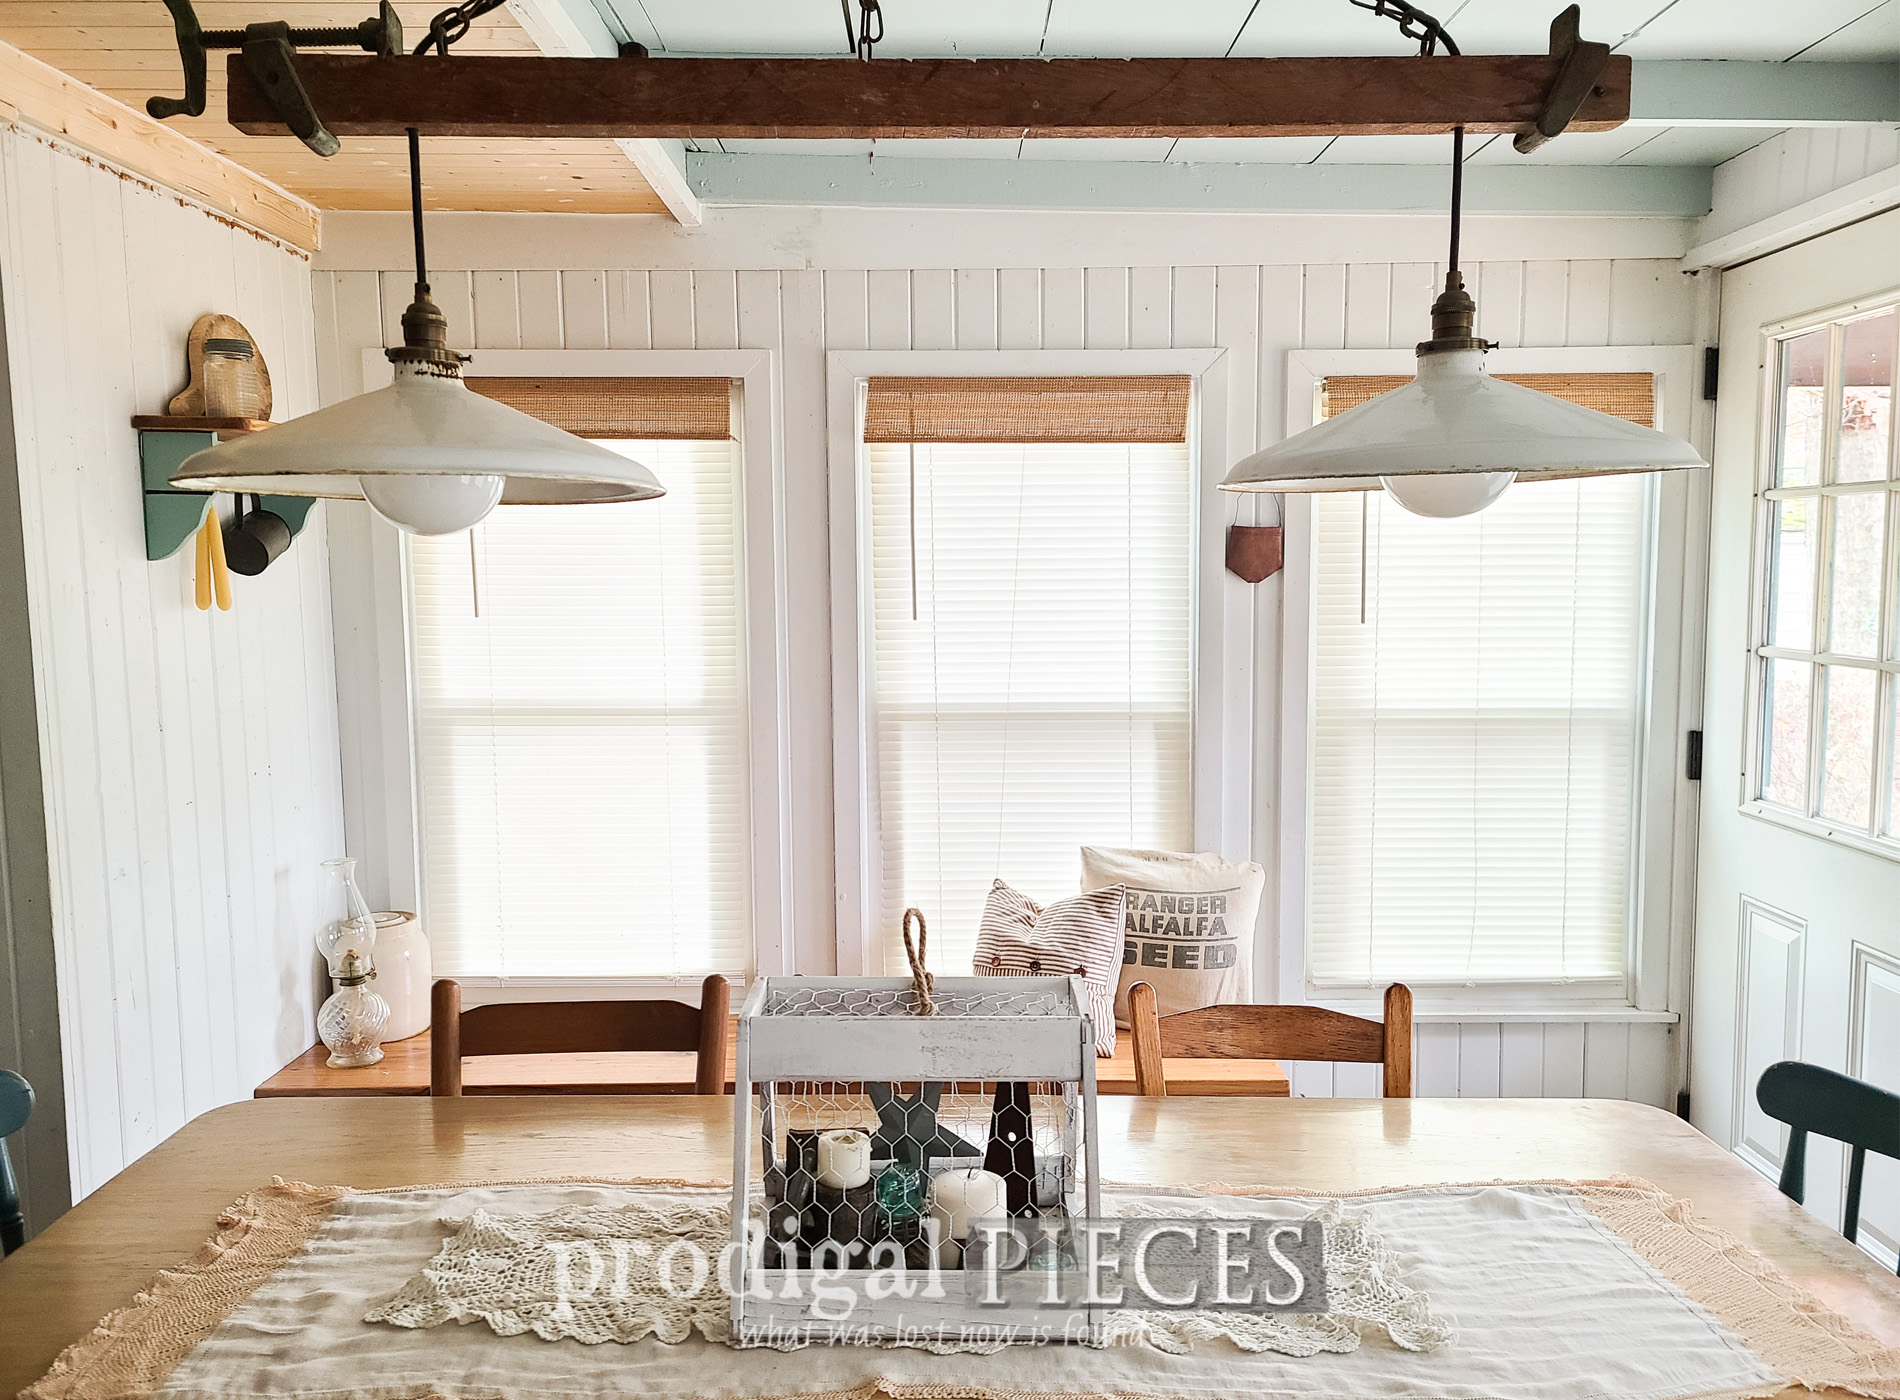 Featured Salvaged Wood Decor for Farmhouse Style by Larissa of Prodigal Pieces | prodigalpieces.com #prodigalpieces #farmhouse #diy #salvaged #homedecor